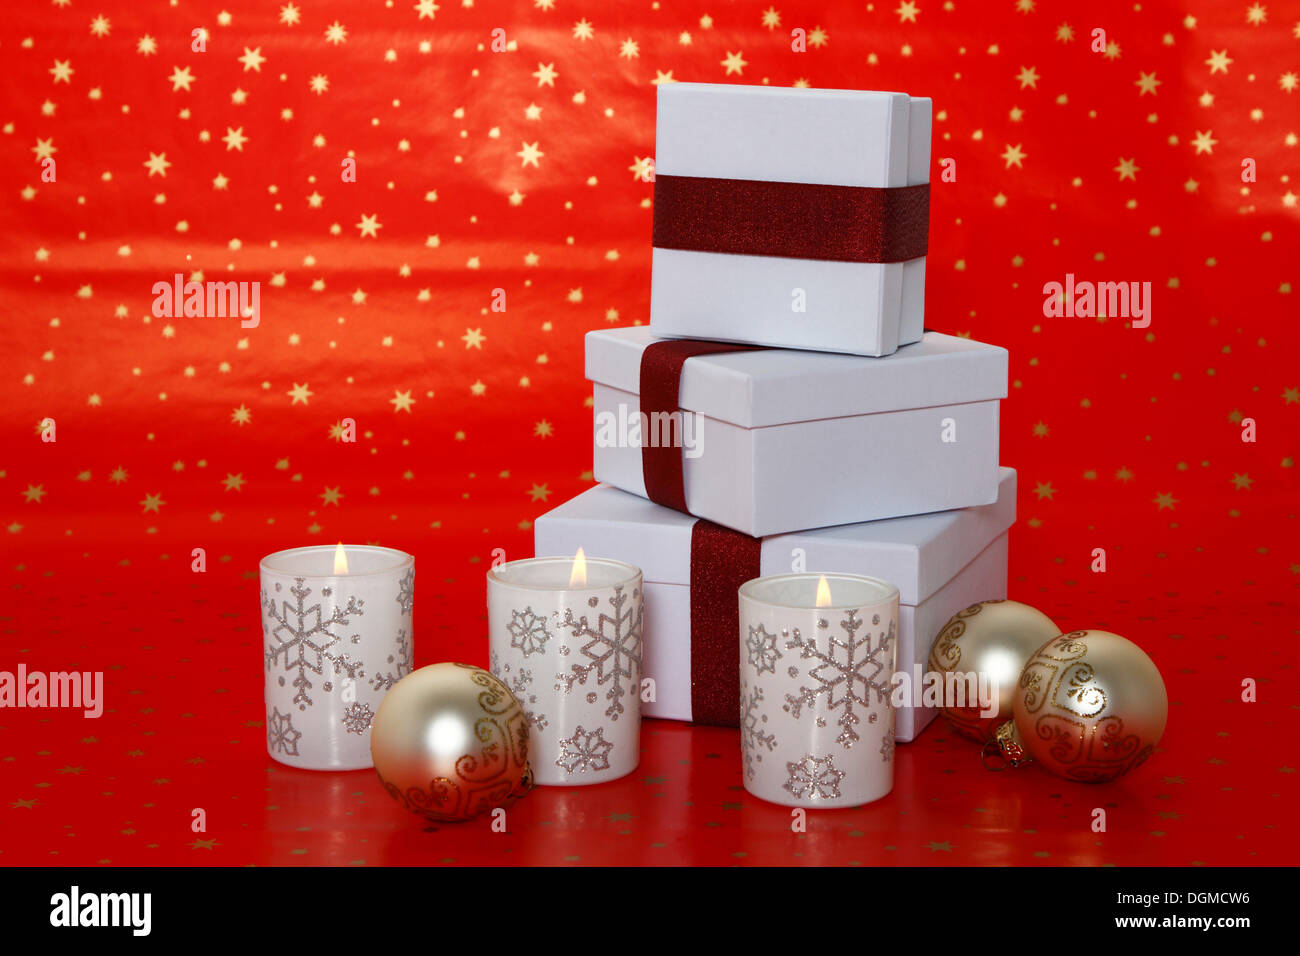 Burning candles standing on red Christmas wrapping paper, with presents and baubles Stock Photo